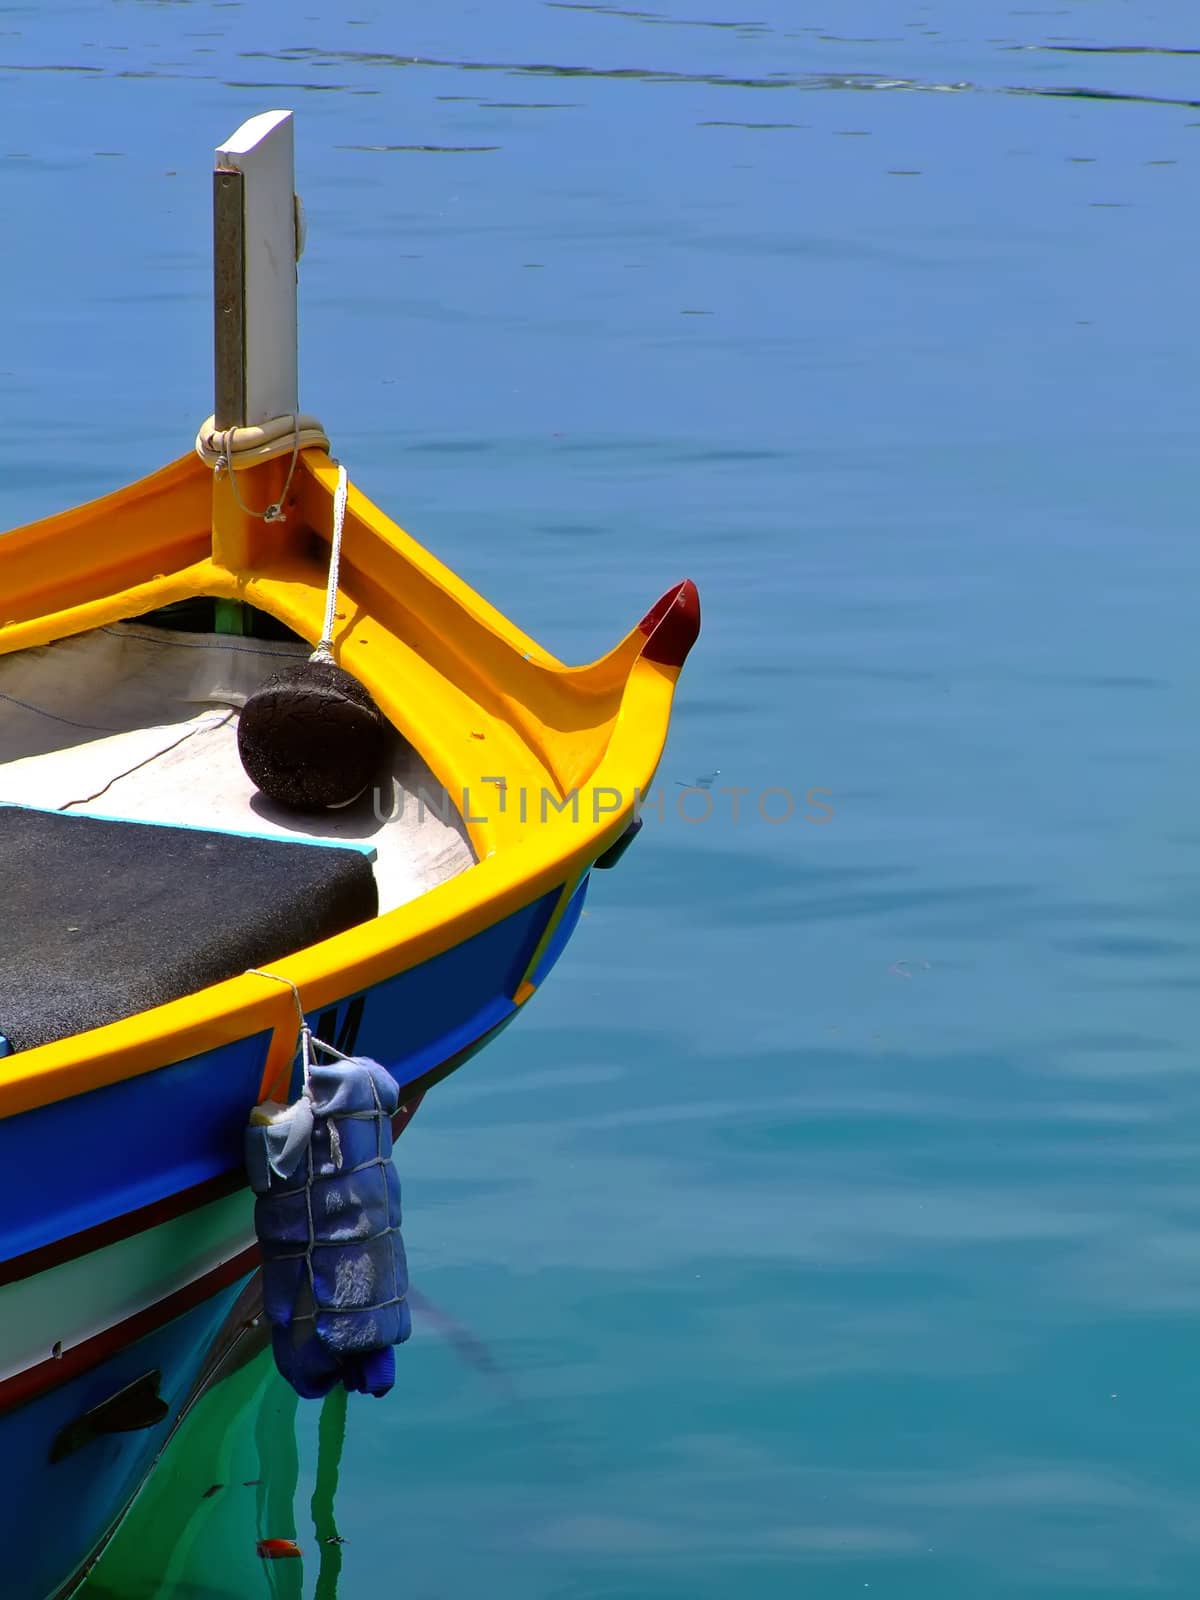 Traditional colors of the traditional Malta fishing boats, commonly known as luzzu or dghajsa.